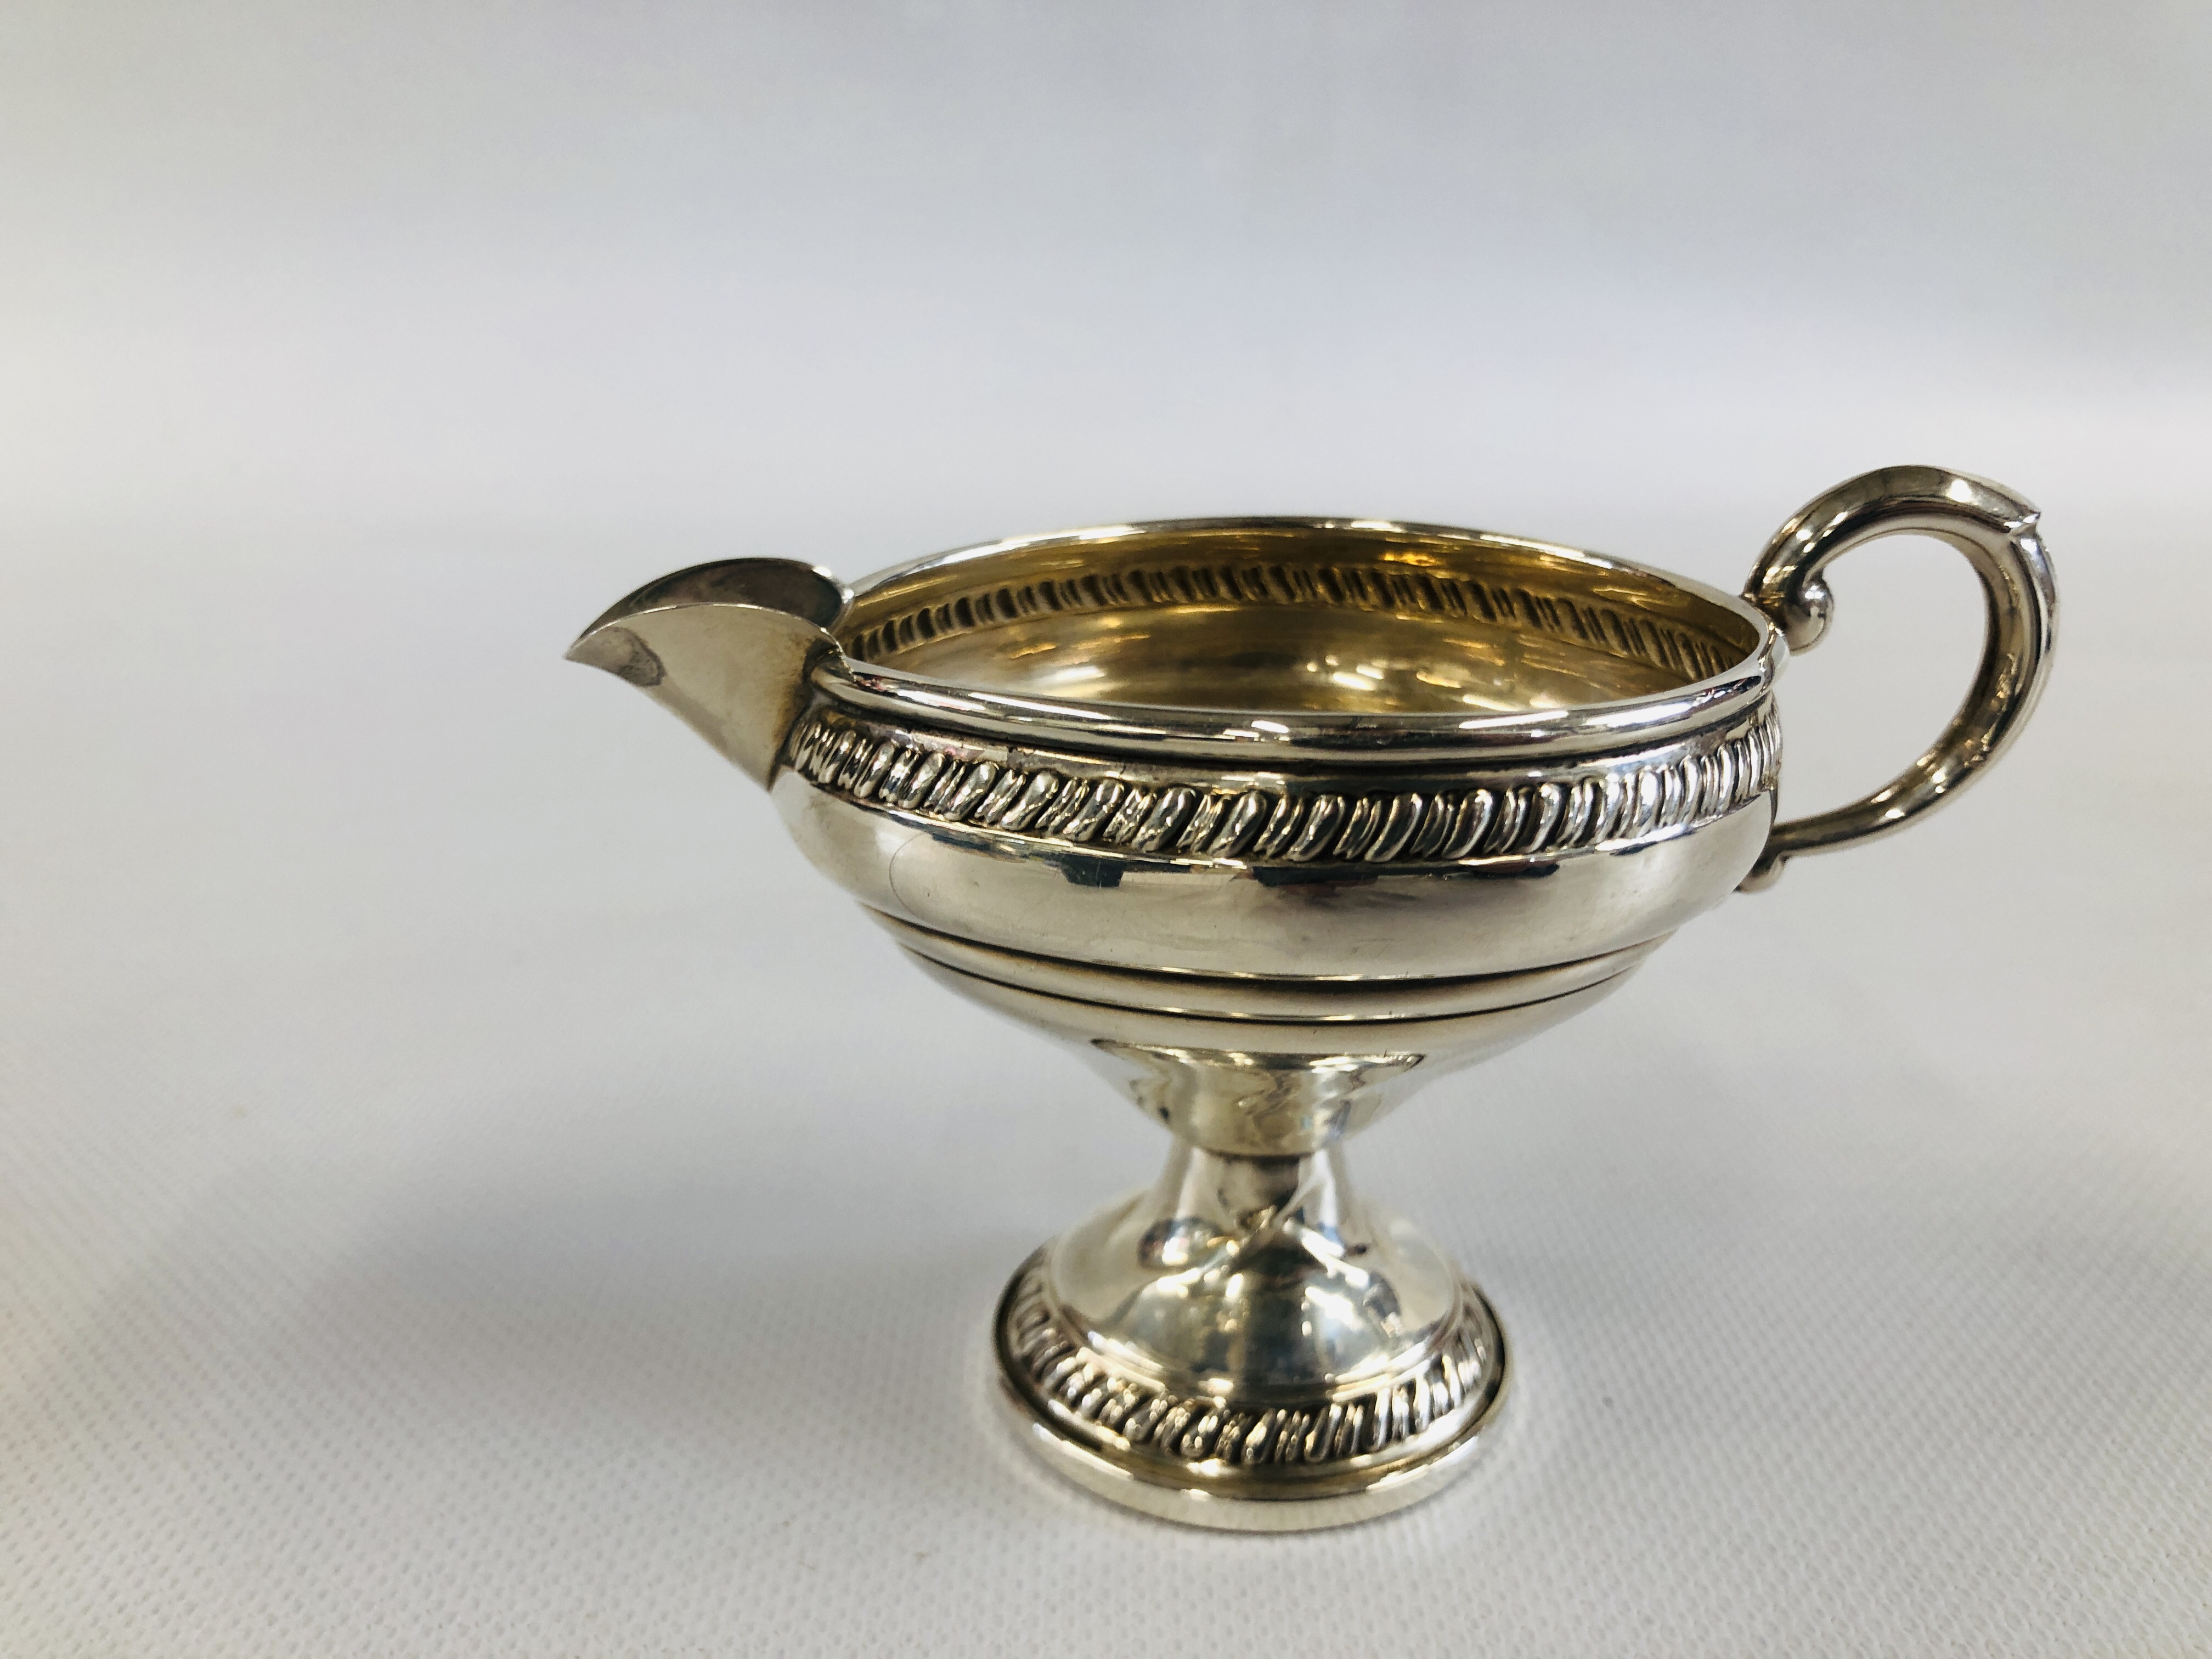 A DECORATIVE CREAM JUG AND MATCHING TWO HANDLED SUGAR BOWL MARKED "CROWN" STERLING. - Image 7 of 13